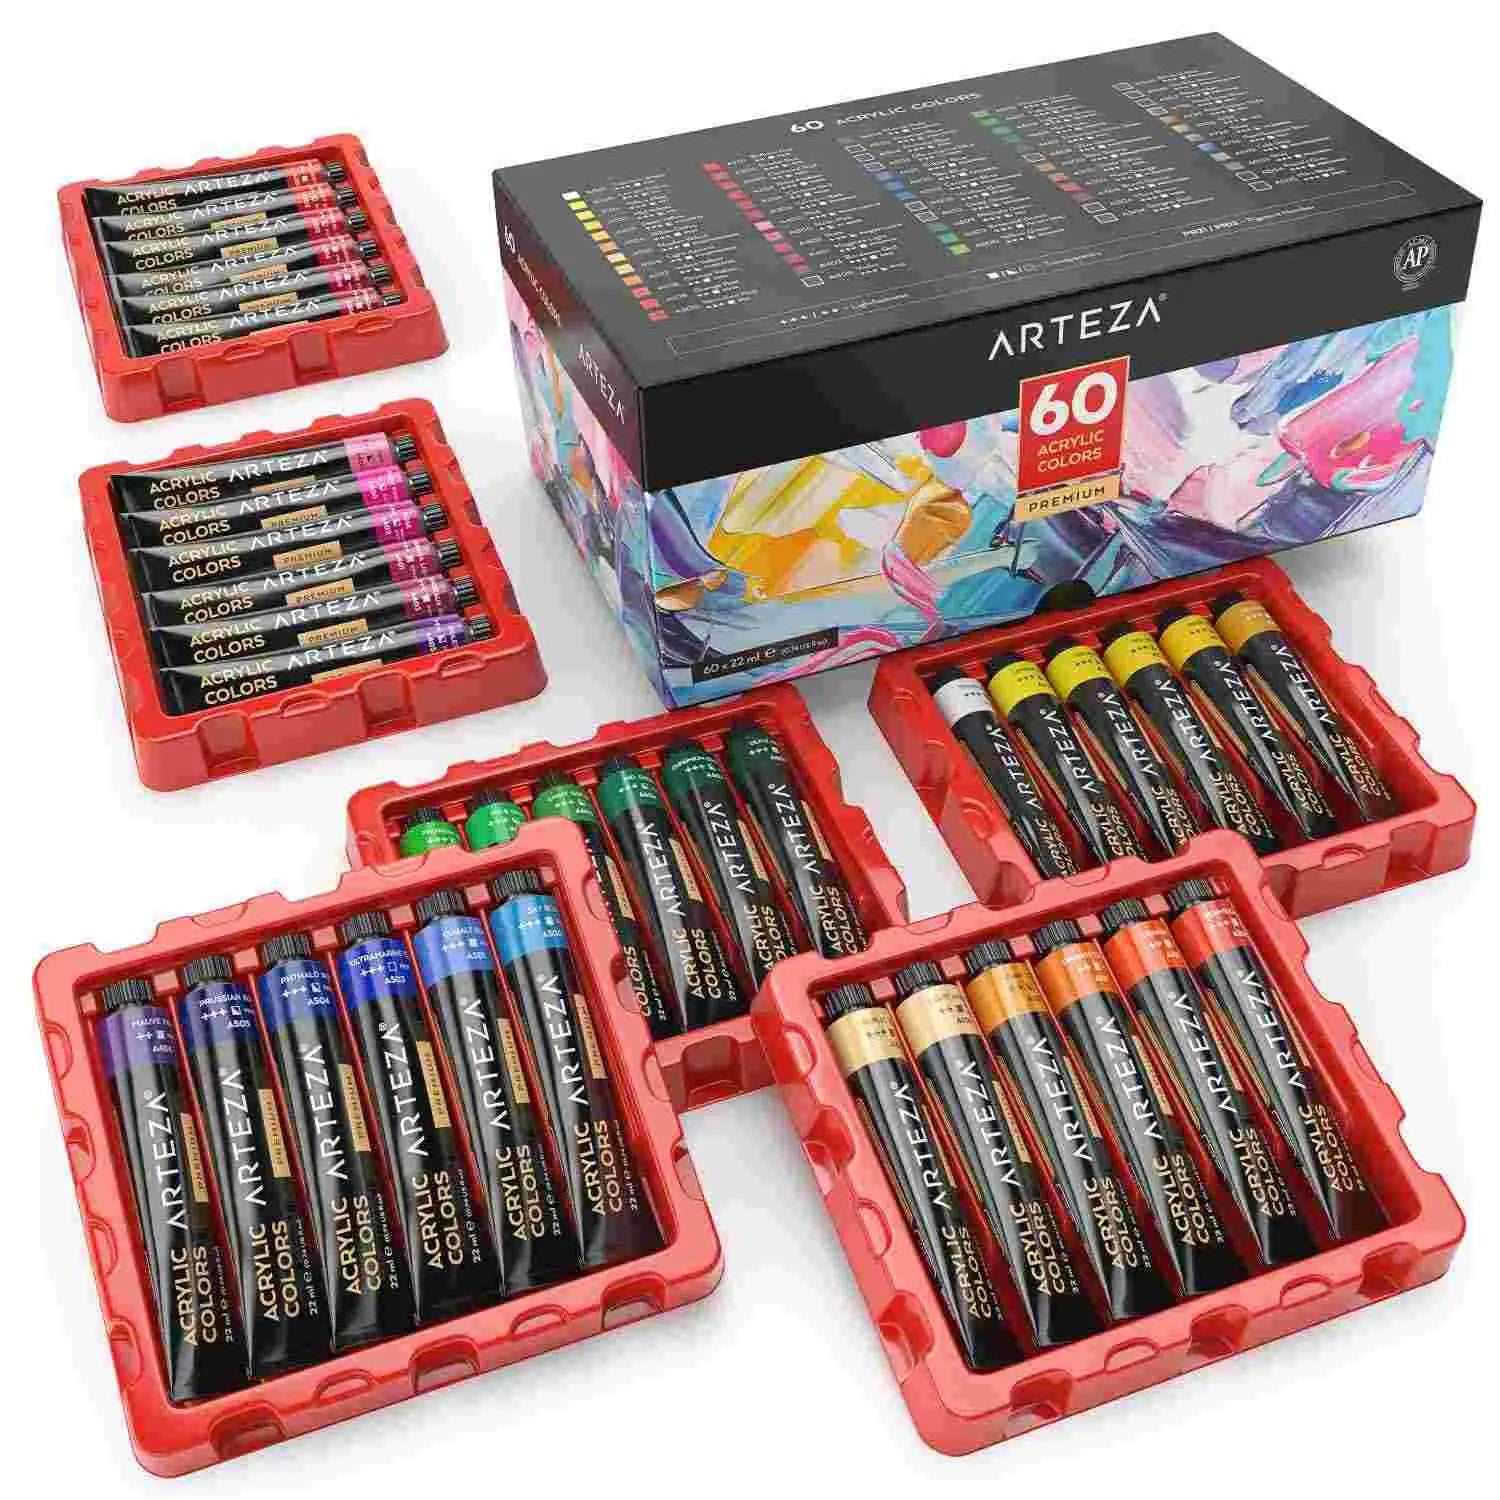 Arteza Acrylic Paint, Set of 60 Colors/Tubes (22 ml) with Storage Box, Rich Pigments, Non Fading, Non Toxic Paints for Artist & Hobby Painters, Art Supplies for Canvas Painting Arteza